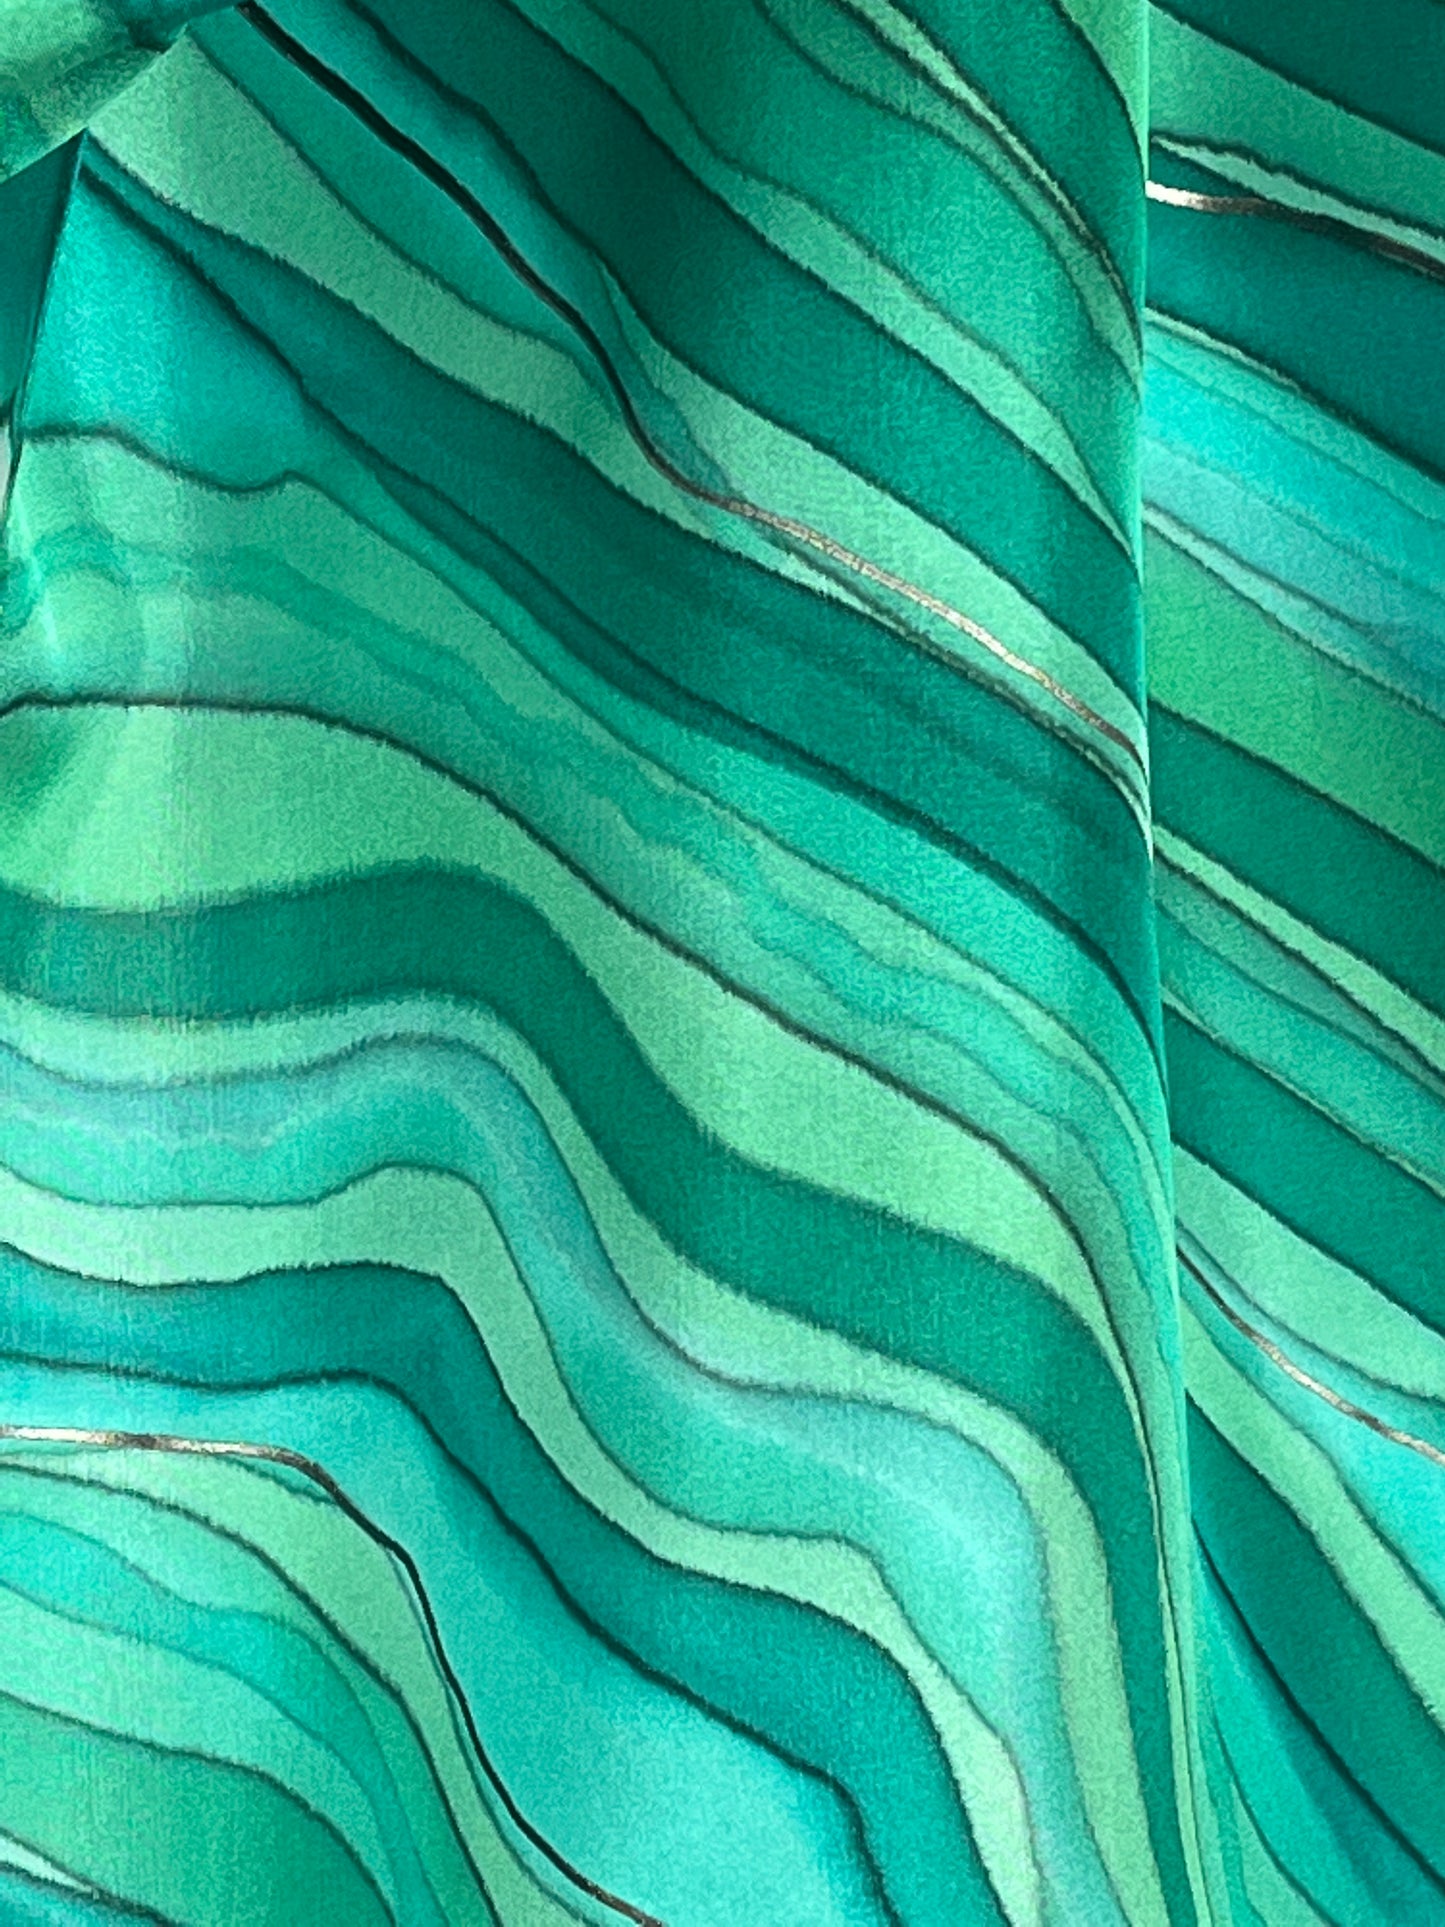 “Magnificent Malachite" - Hand-dyed Silk Scarf - $125